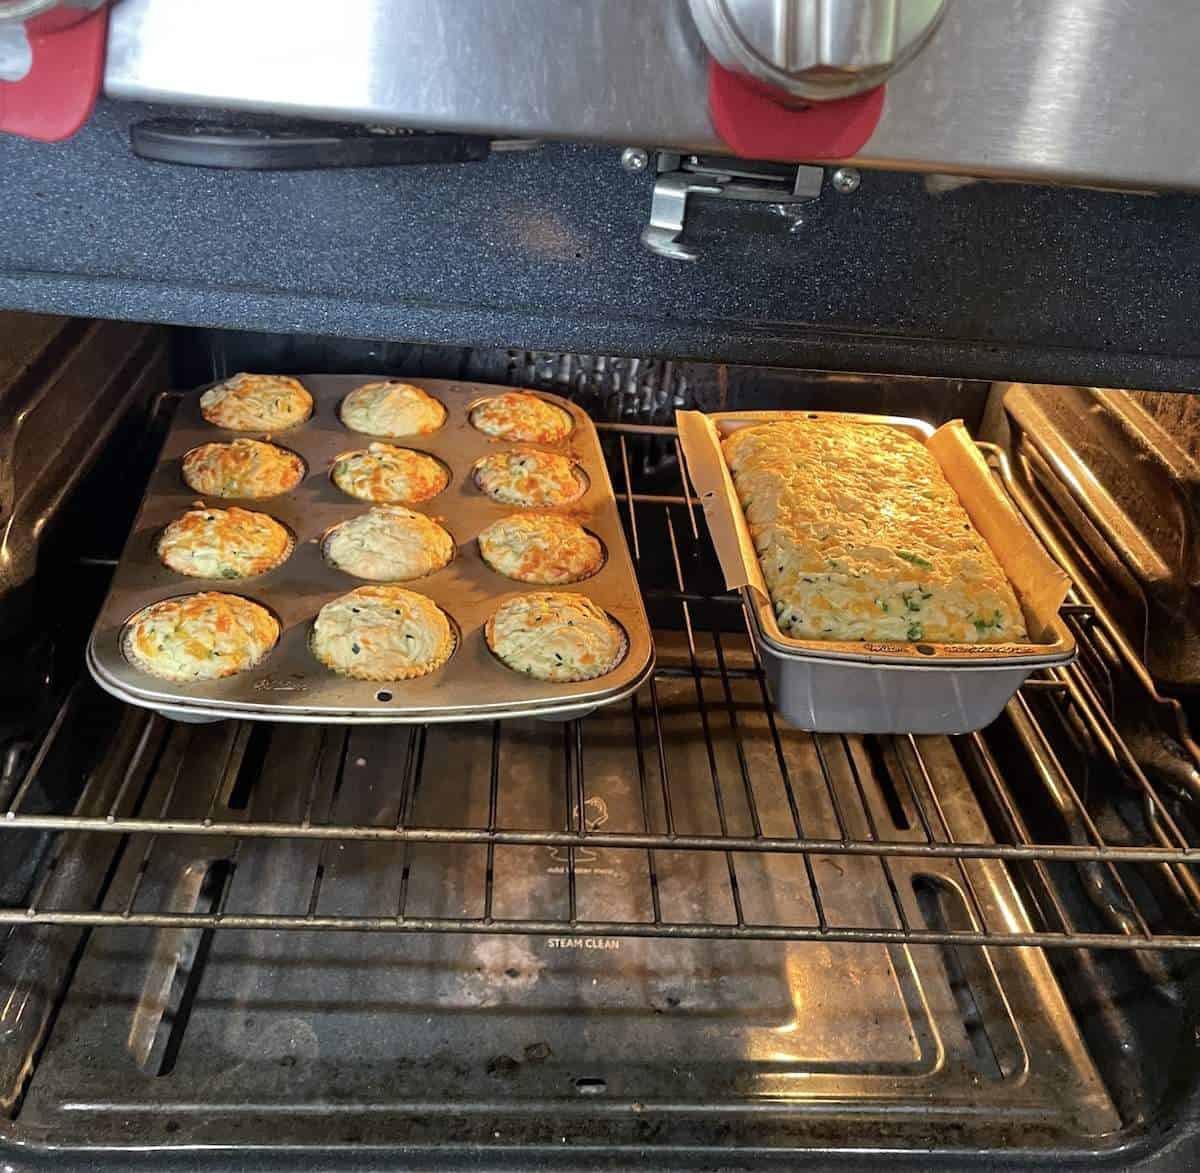 A pan of savory zucchini muffins and a loaf of zucchini bread baking in the oven.